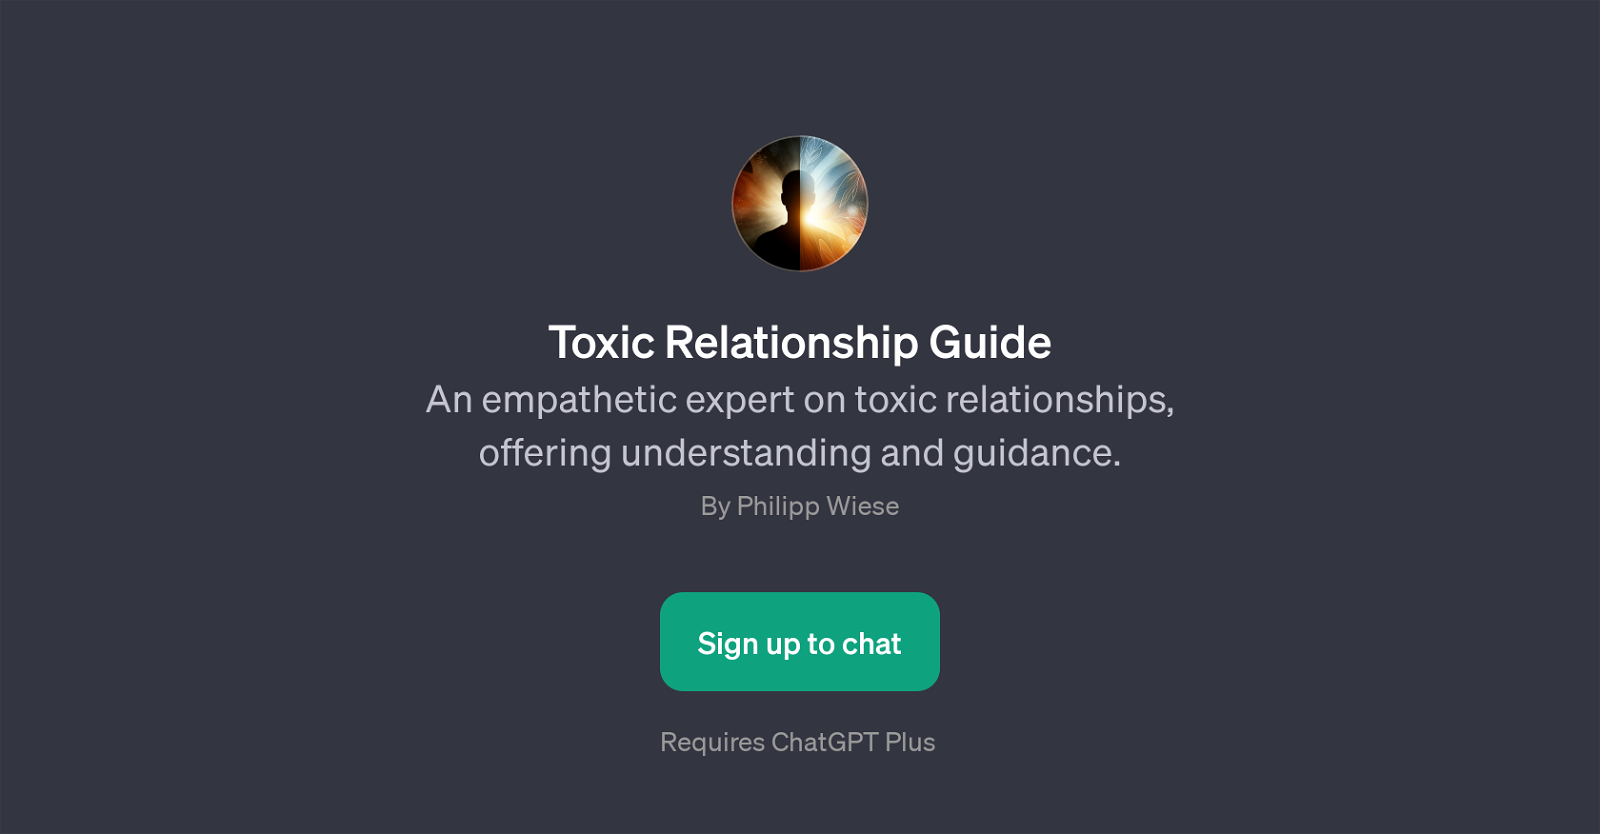 Toxic Relationship Guide website